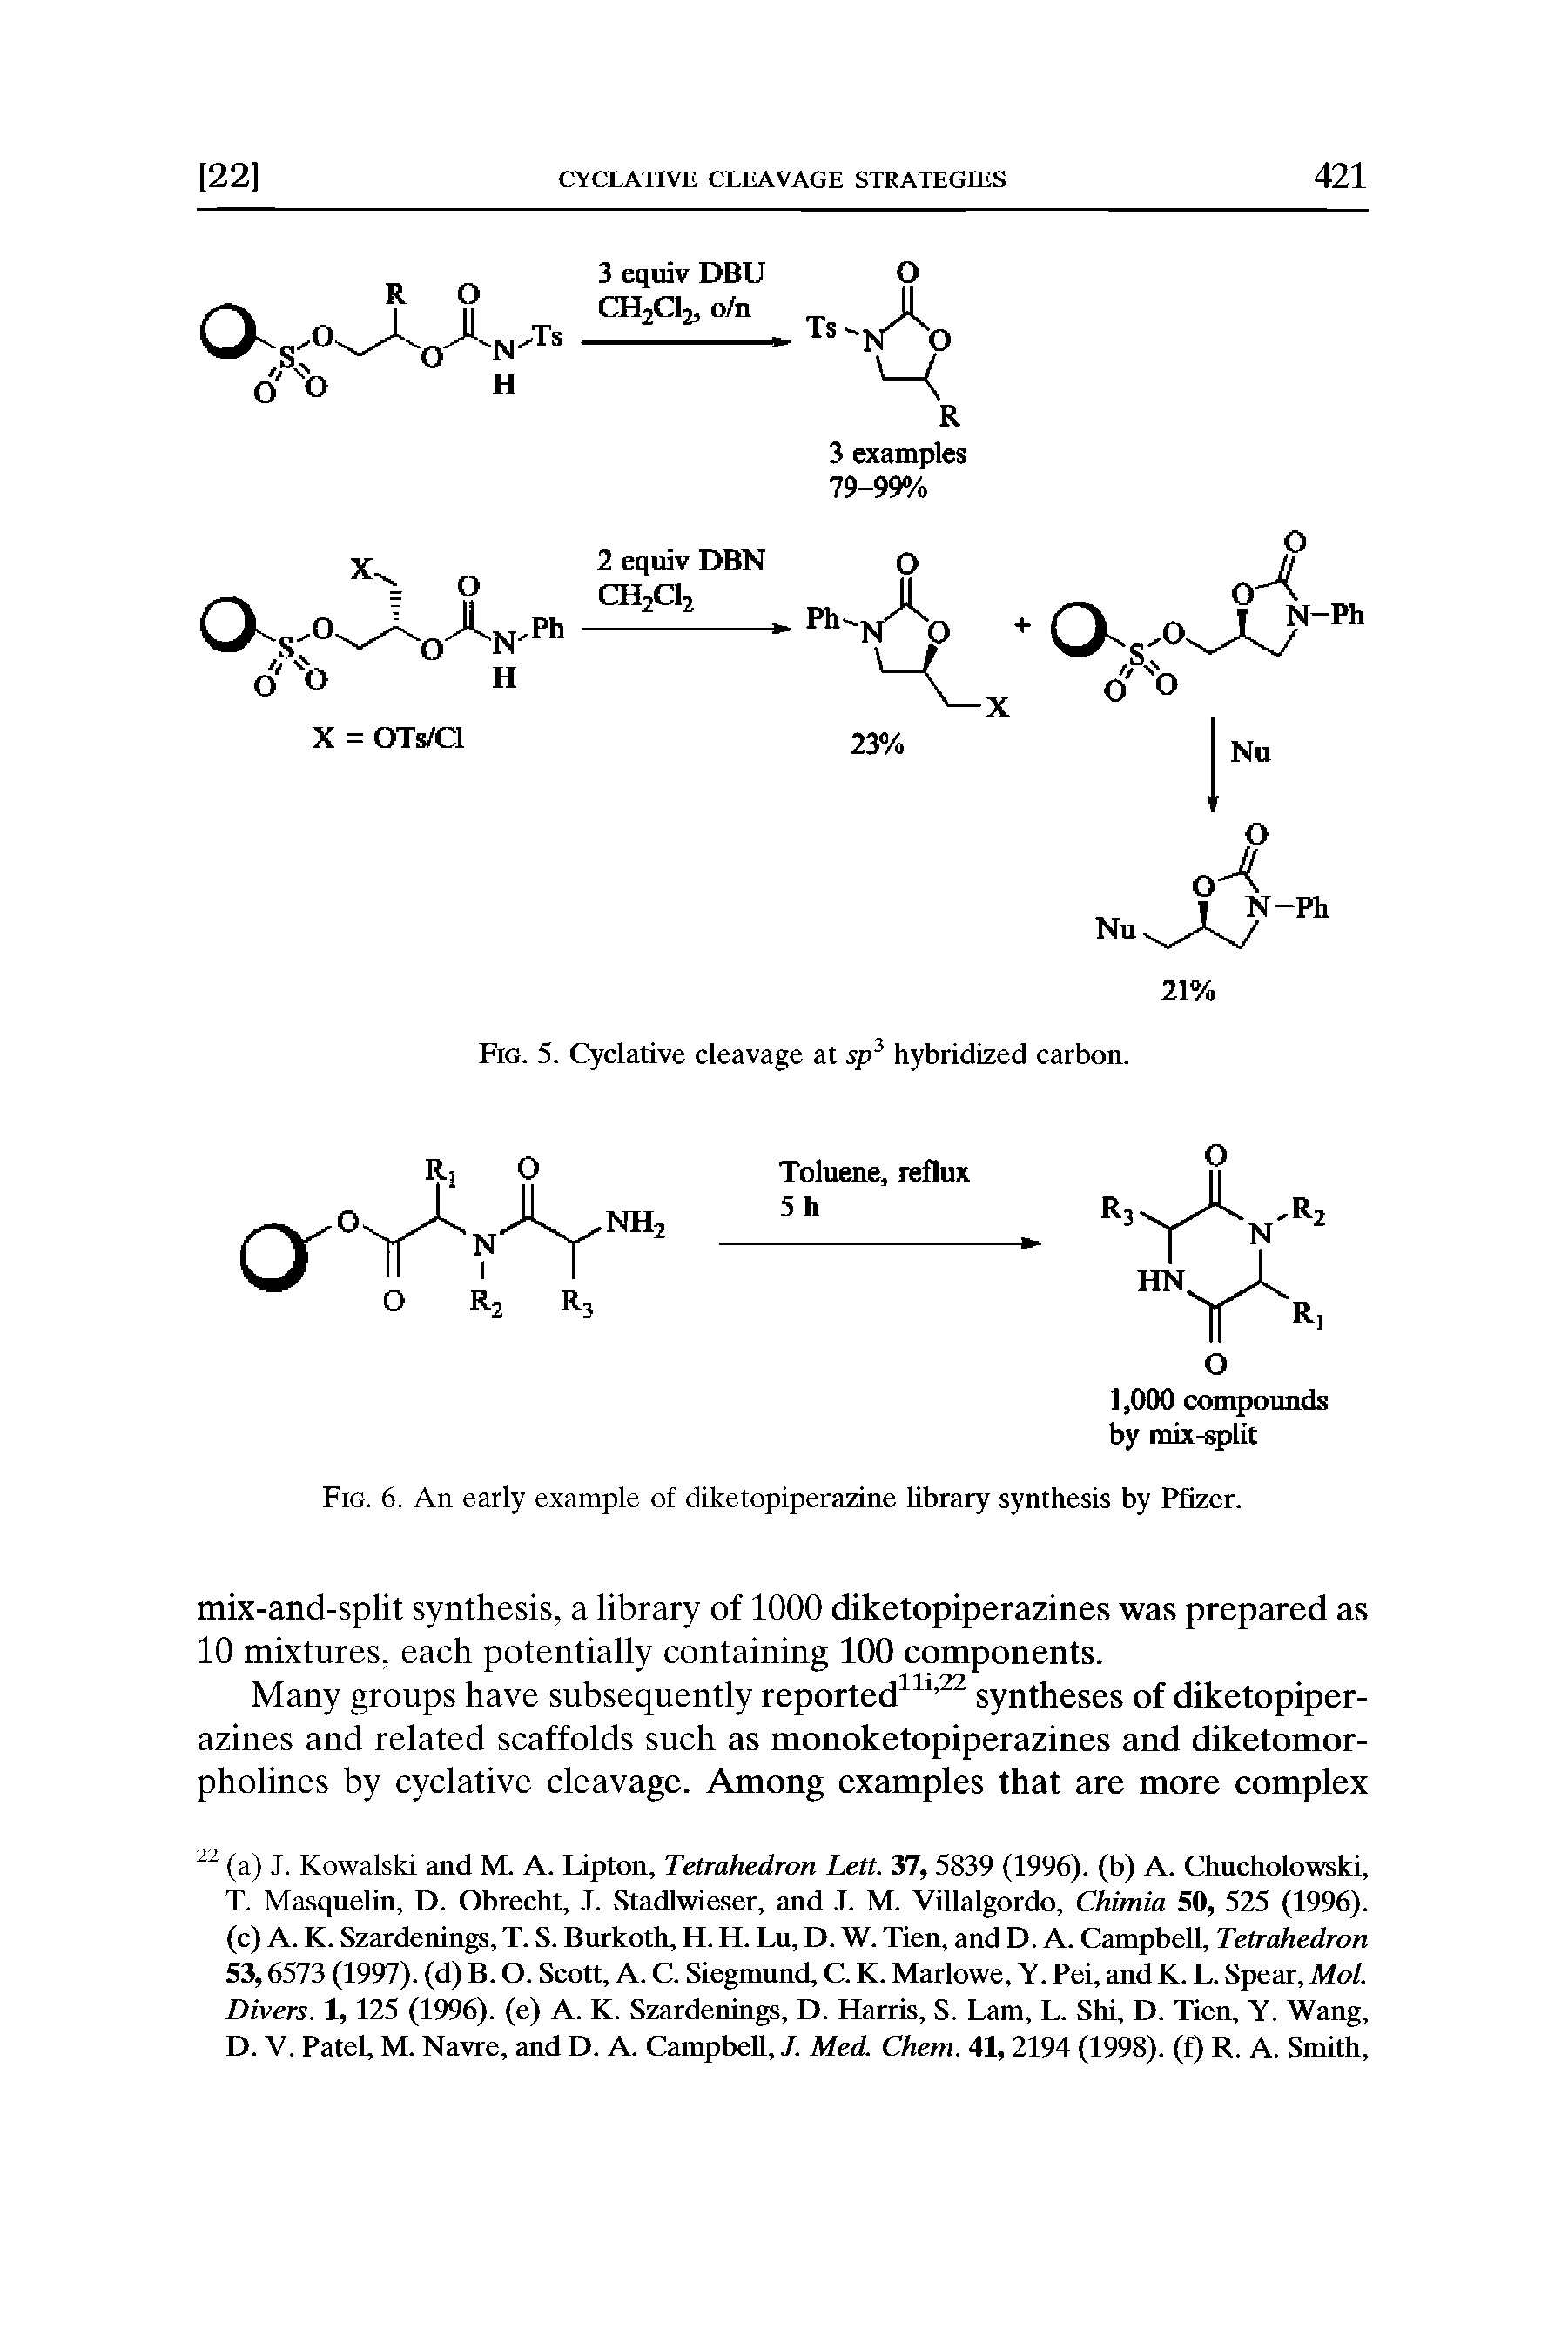 Fig. 6. An early example of diketopiperazine library synthesis by Pfizer.